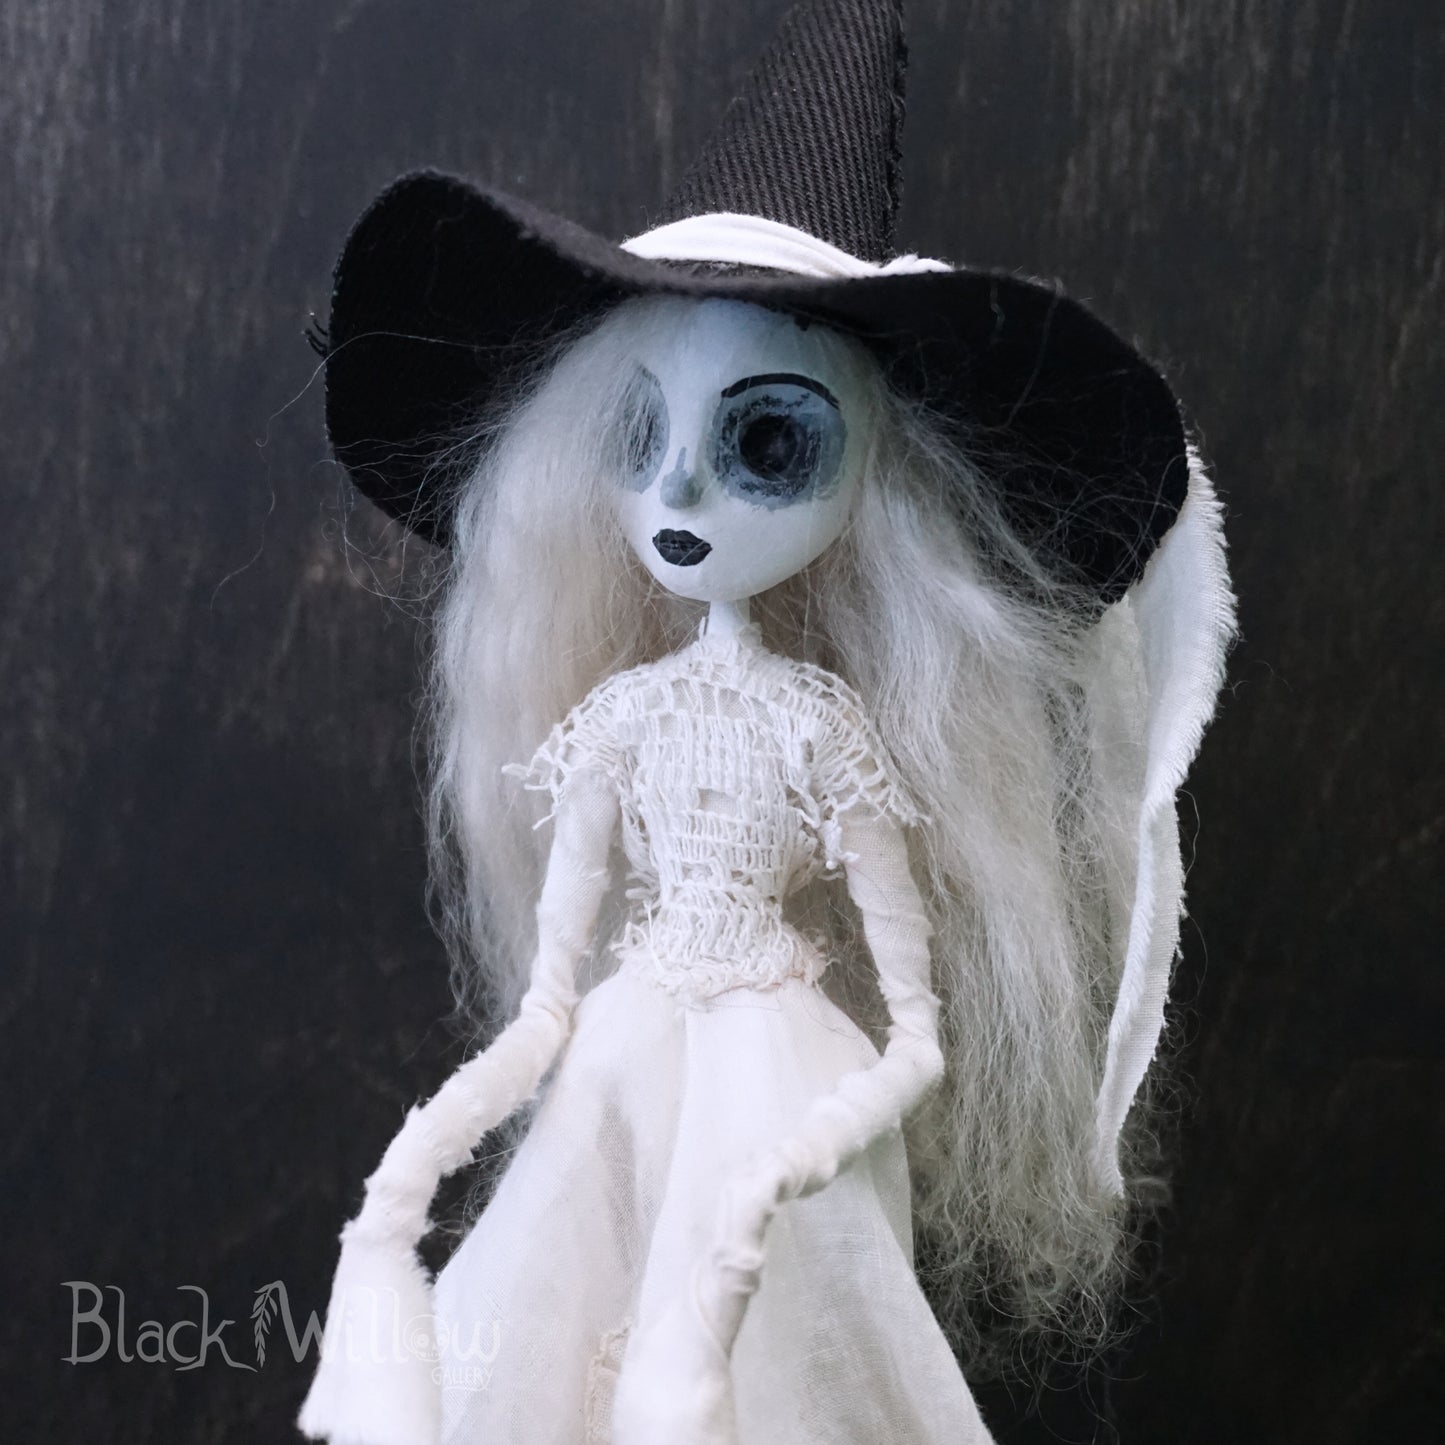 White Witch Stitched Souls Art Doll